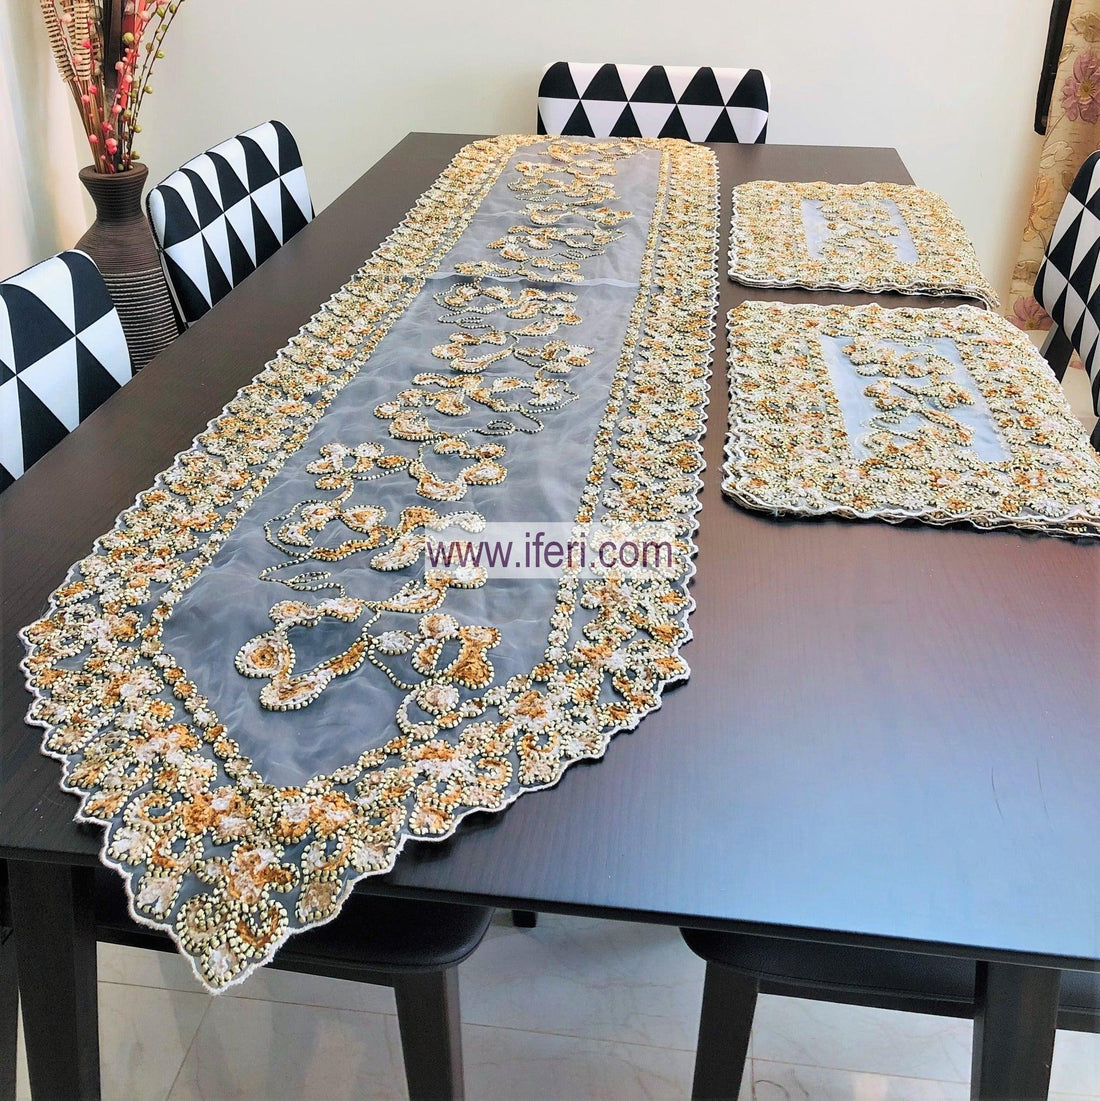 7 Pcs Embroidered Table Mat with Runner RJ1324 Price in Bangladesh - iferi.com